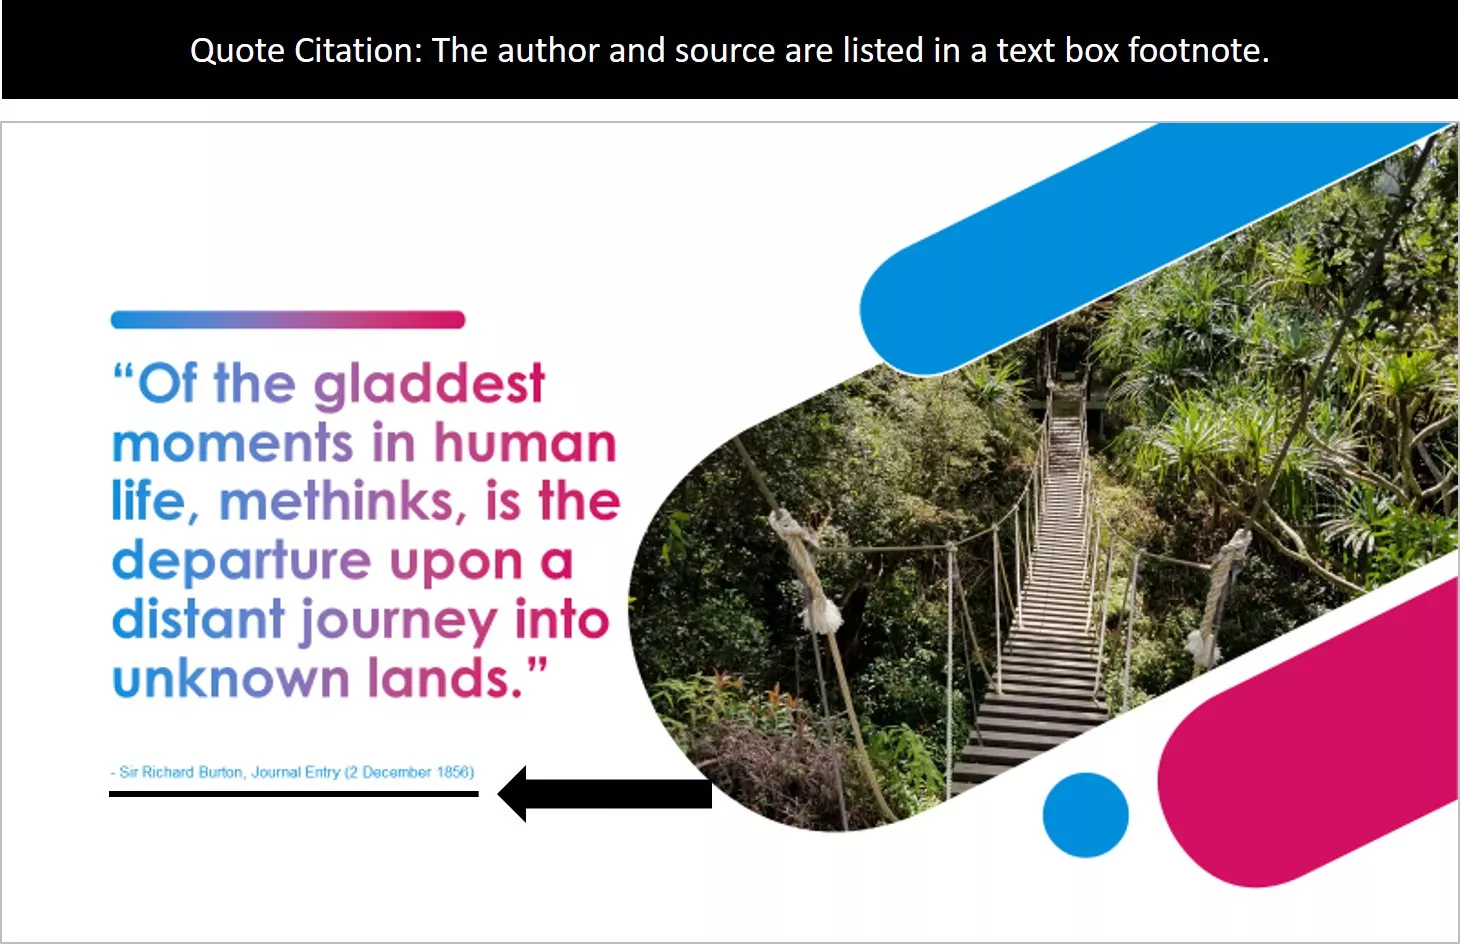 Example of a slide with a footer citation for a quote.